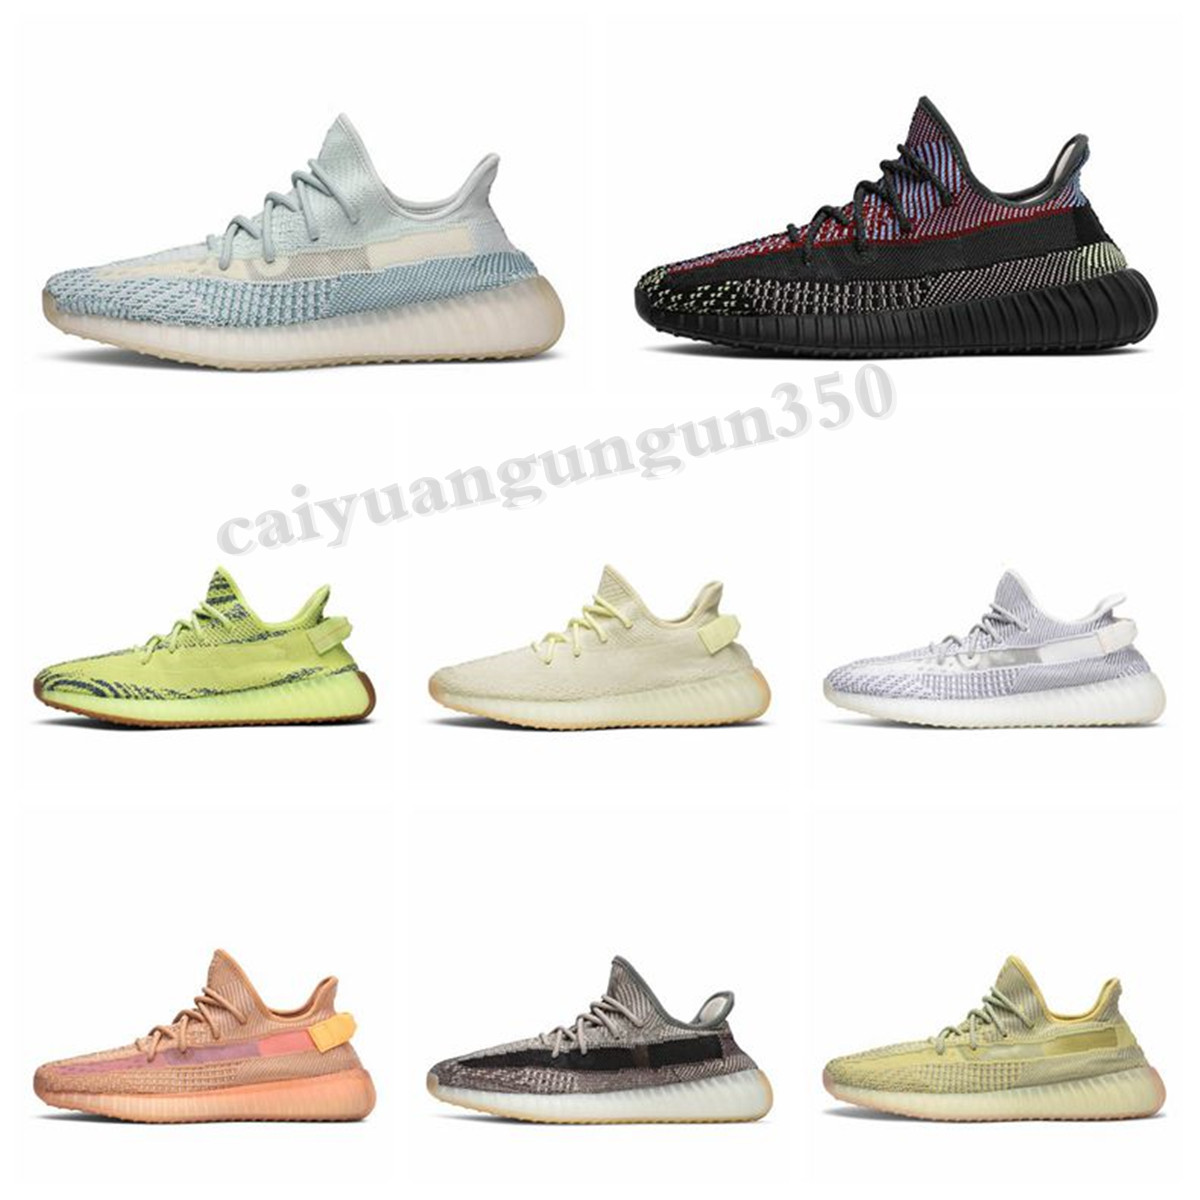 

2020 newest Sply 35 V2 Blue Tint Yellow Semi Frozen Cream White Zebra Bred Black Red Beluga 2.0 Kanye West Shoes Sneakers WX07